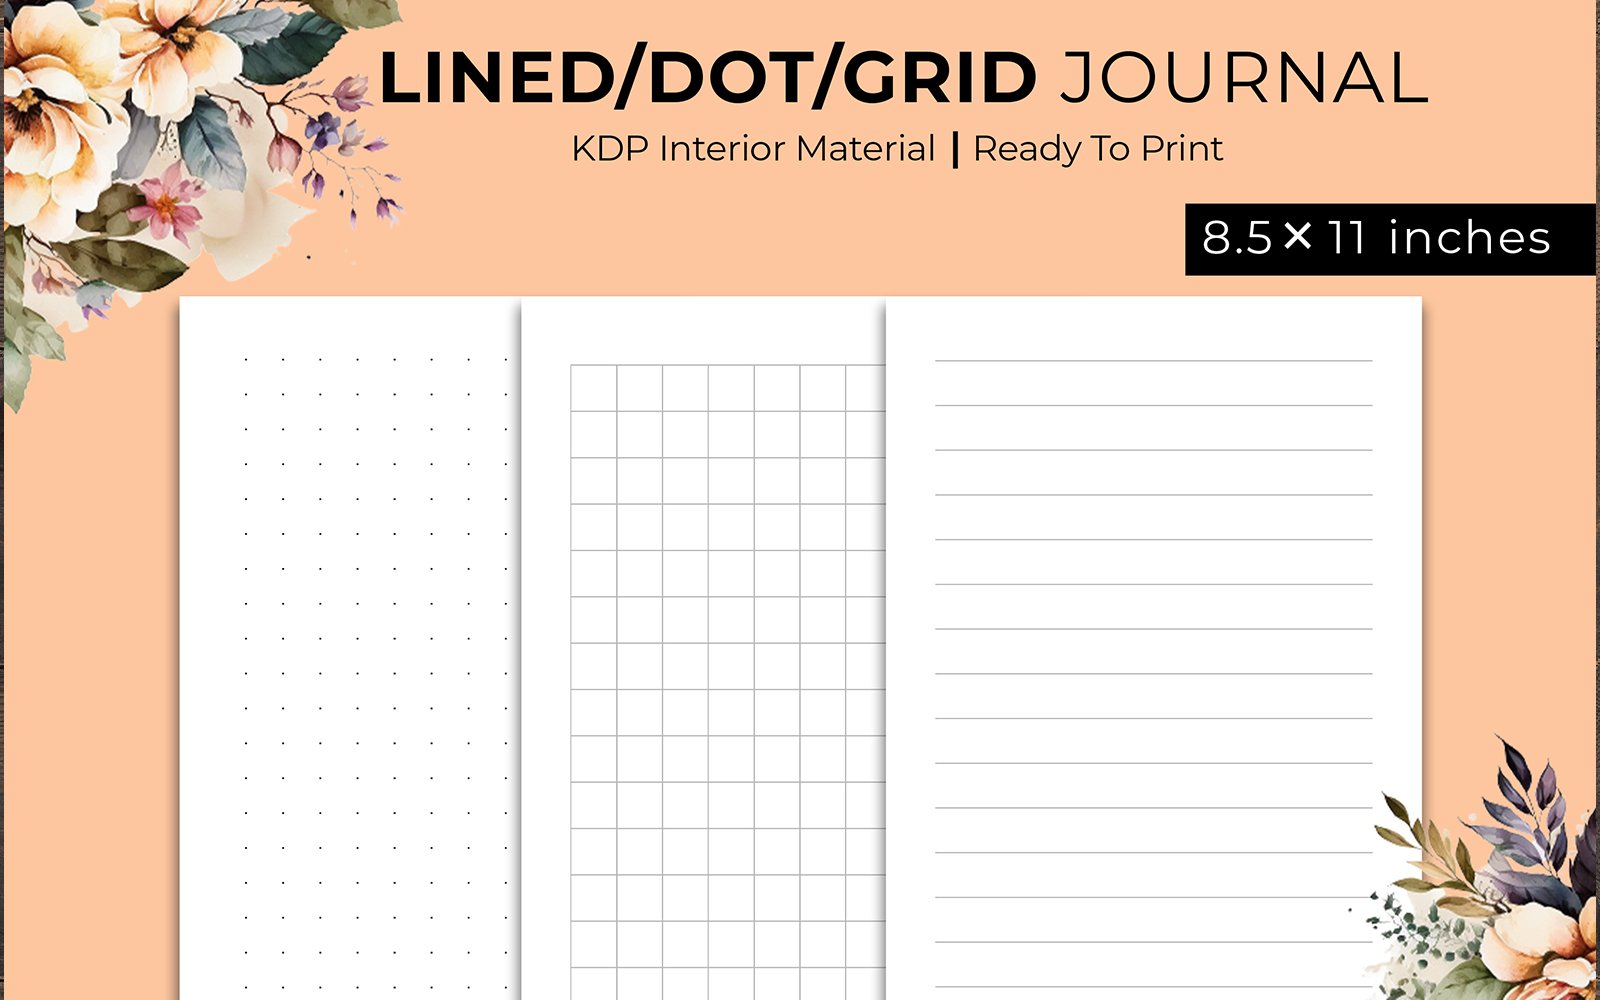 Lined, Dots and Grid Journal Kdp Interior 8.5×11 inches